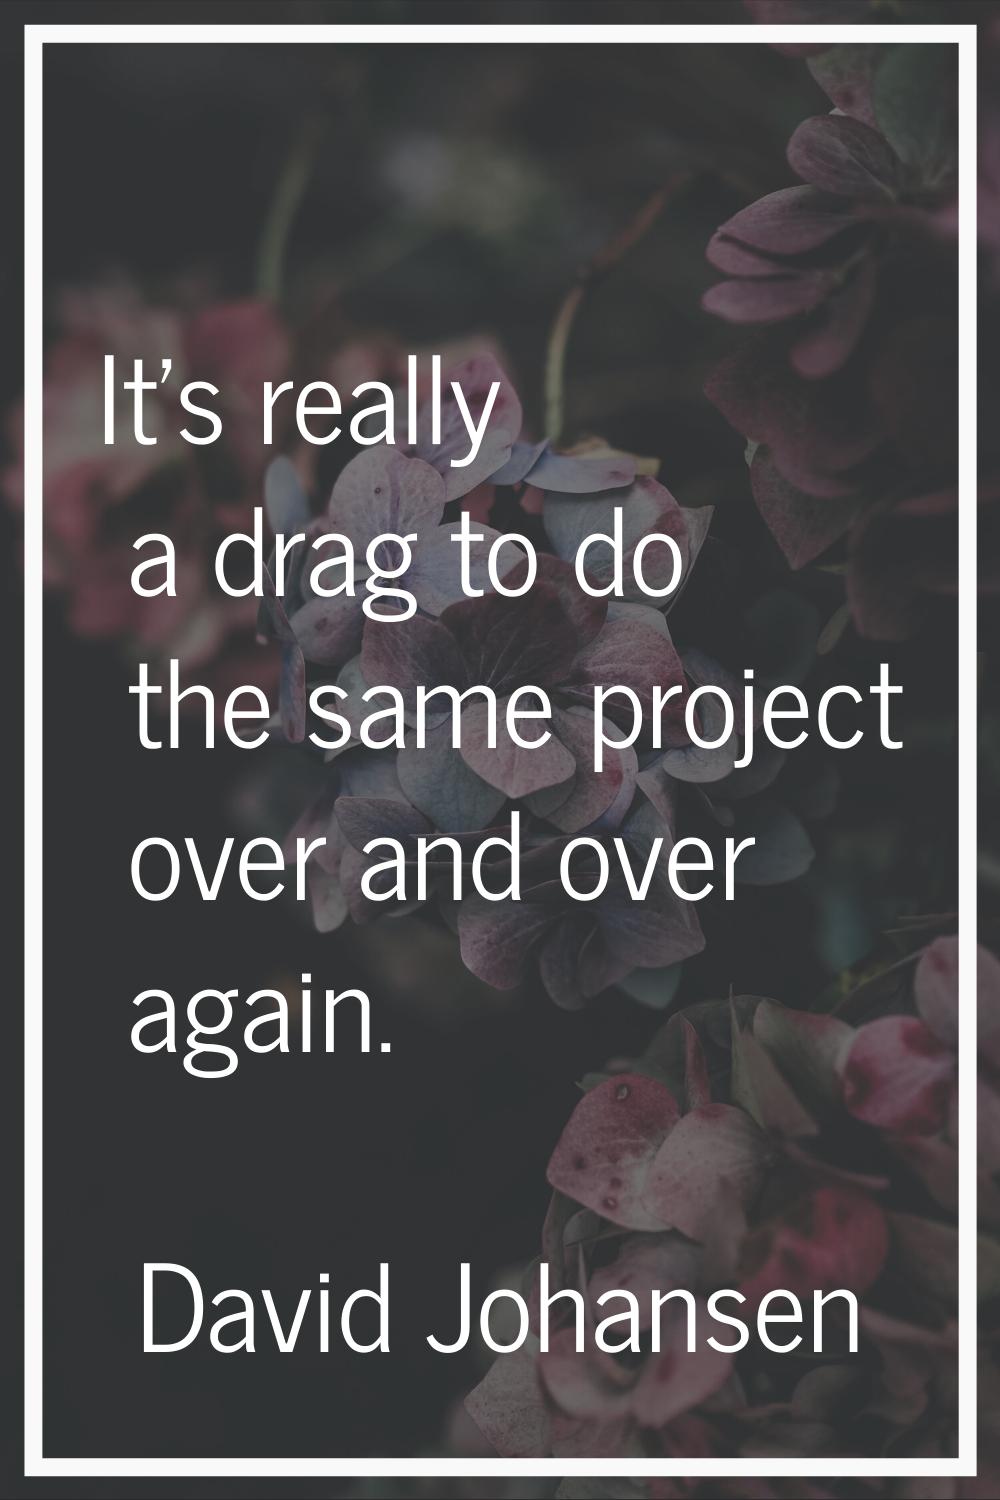 It's really a drag to do the same project over and over again.